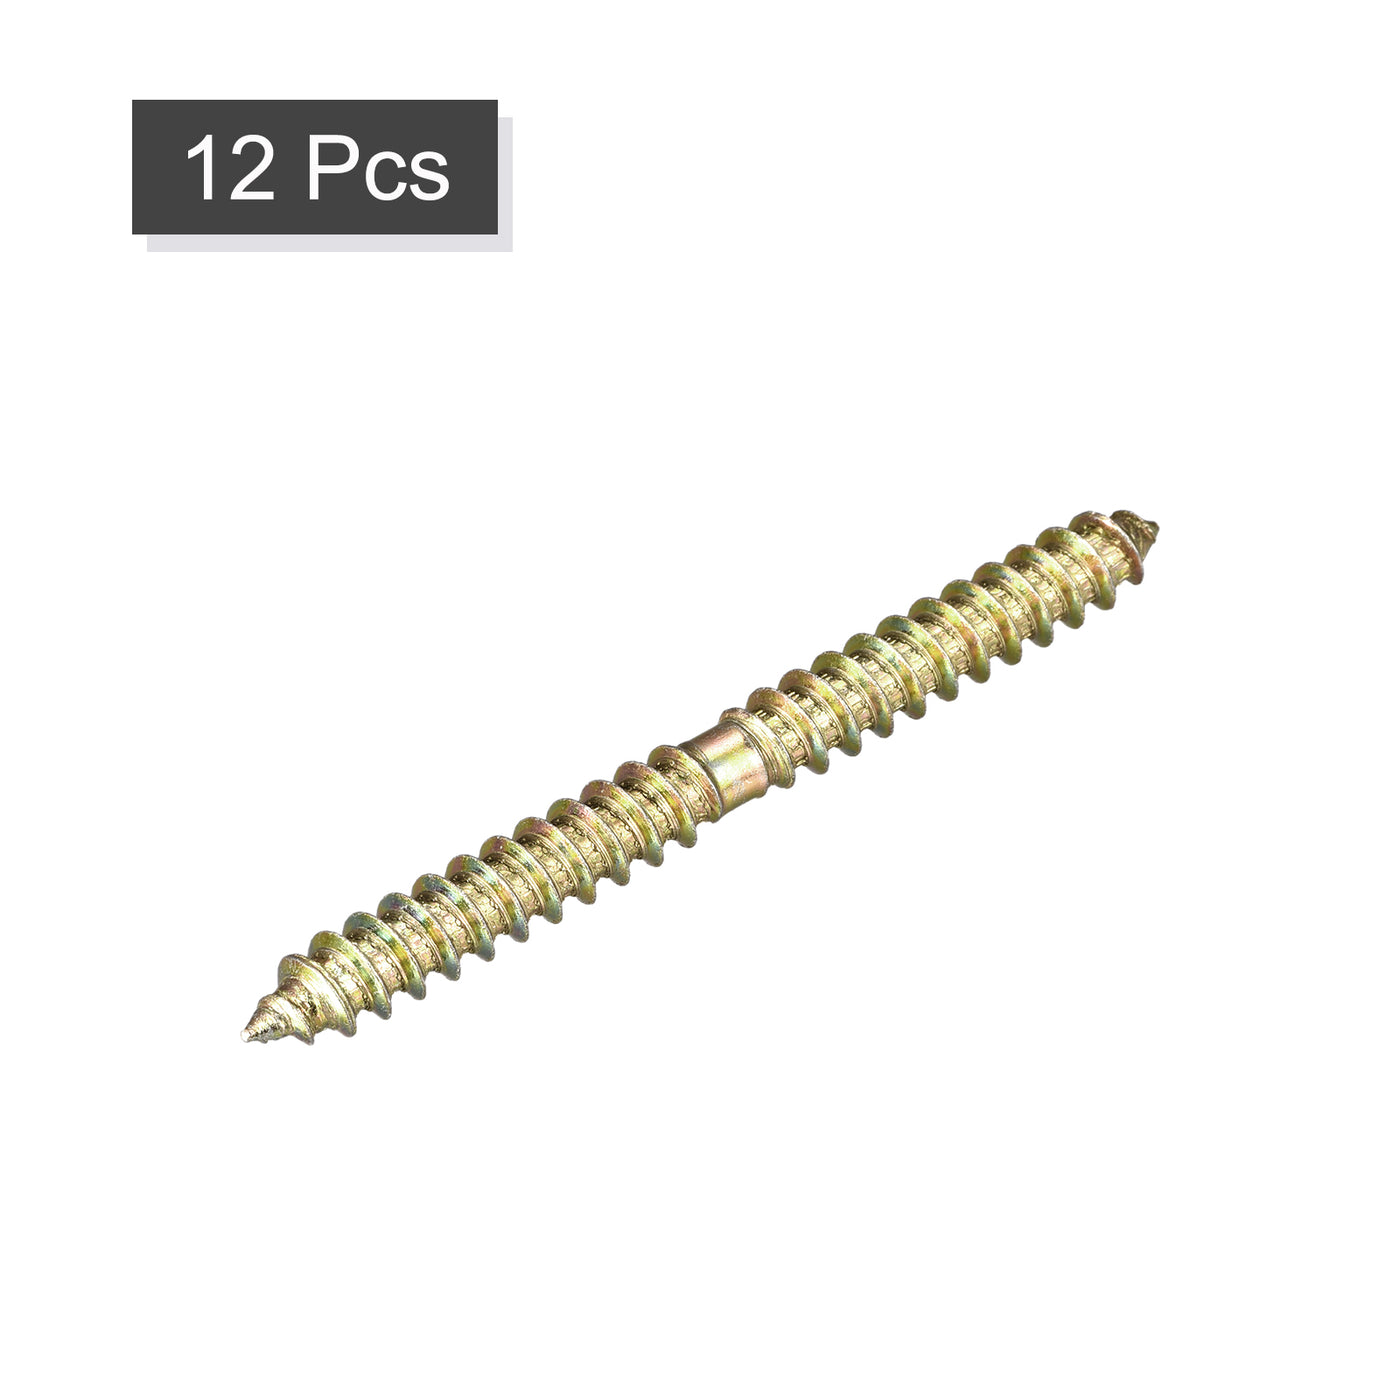 Uxcell Uxcell 8x46mm Hanger Bolts, 12pcs Double Ended Self-Tapping Thread Dowel Screws